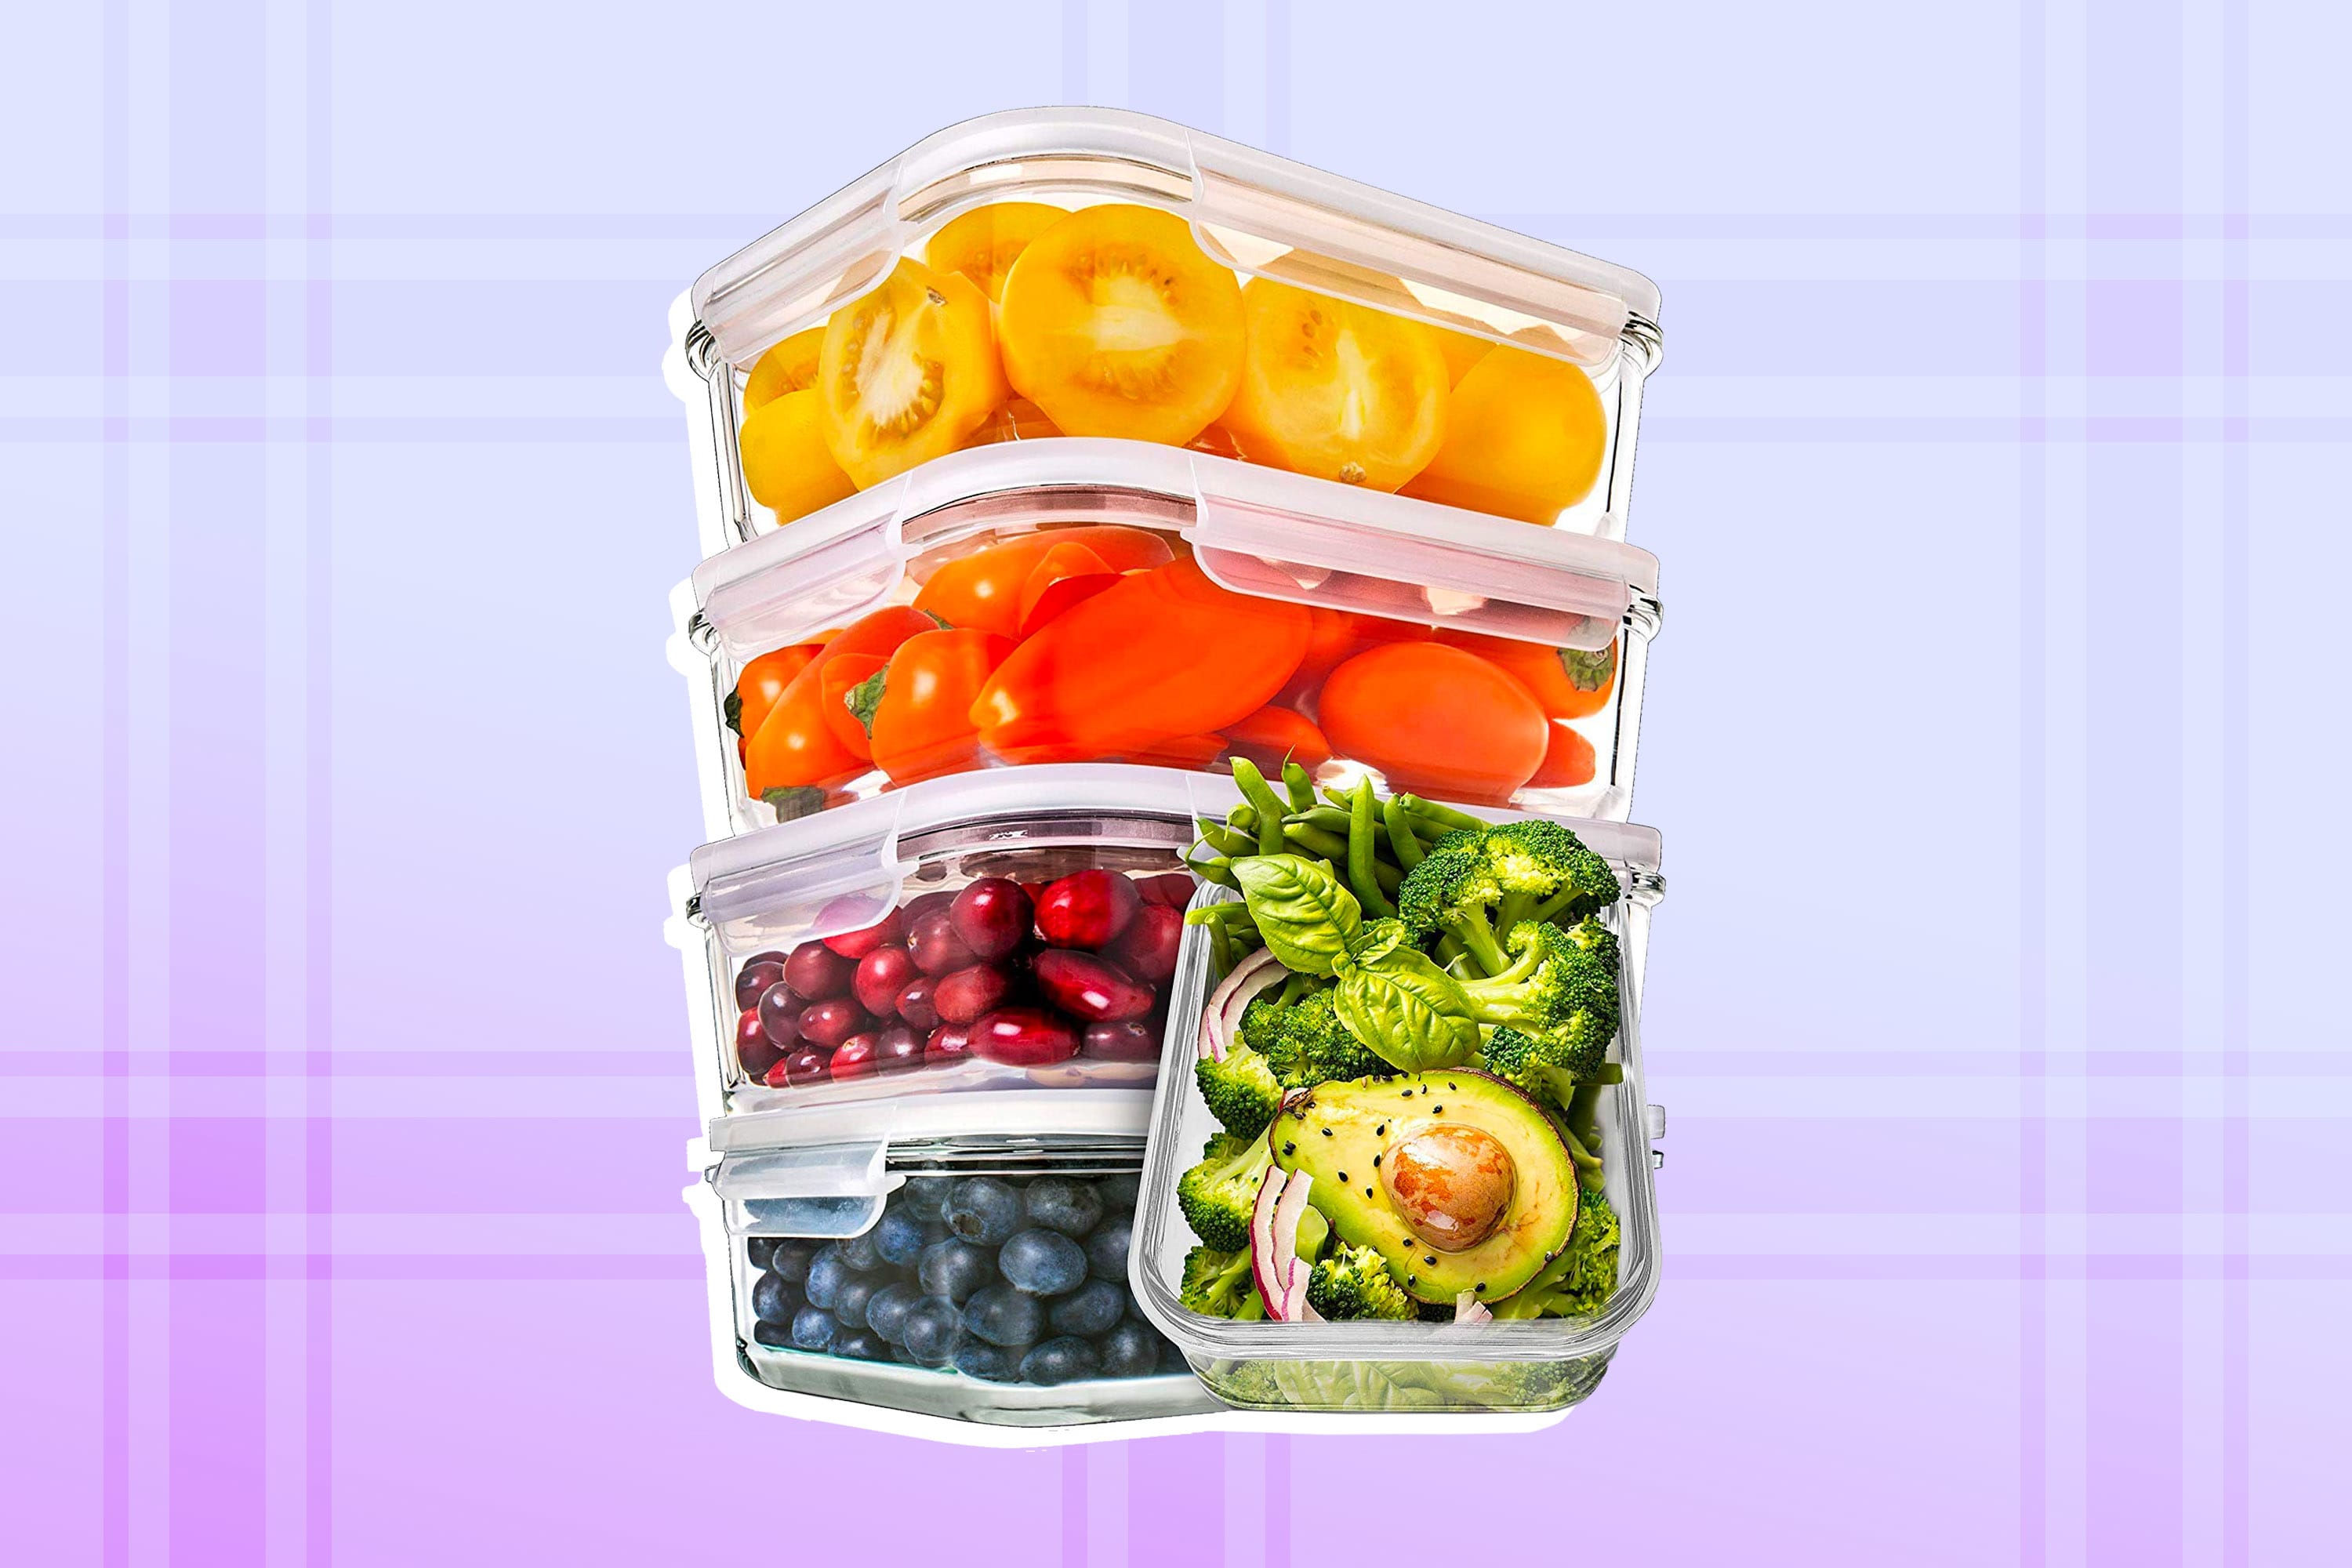 Prep Naturals - Glass Food Storage Containers - Meal Prep